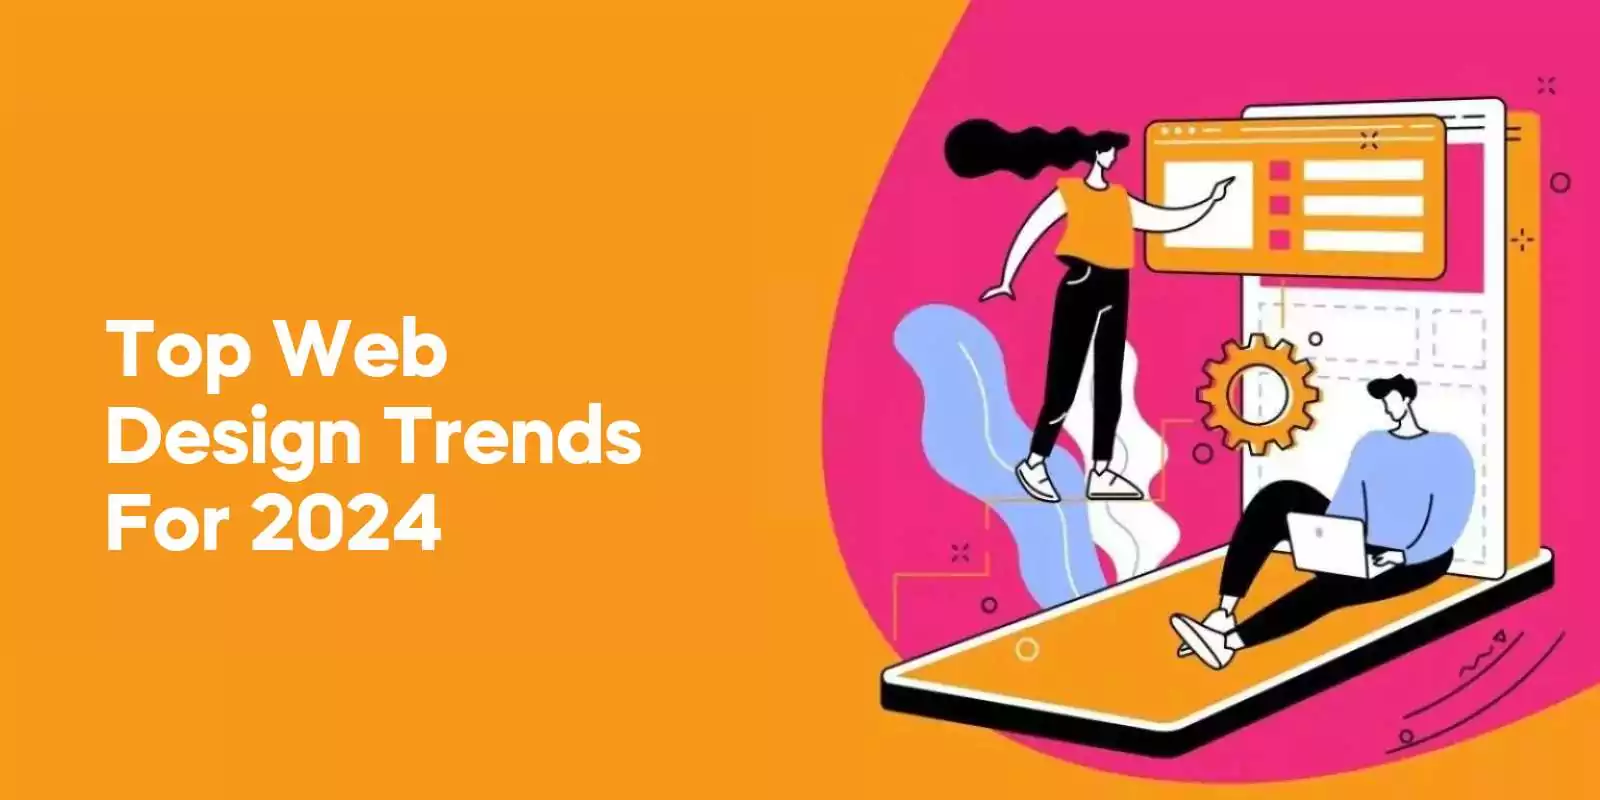 Top Web Design Trends For 2024